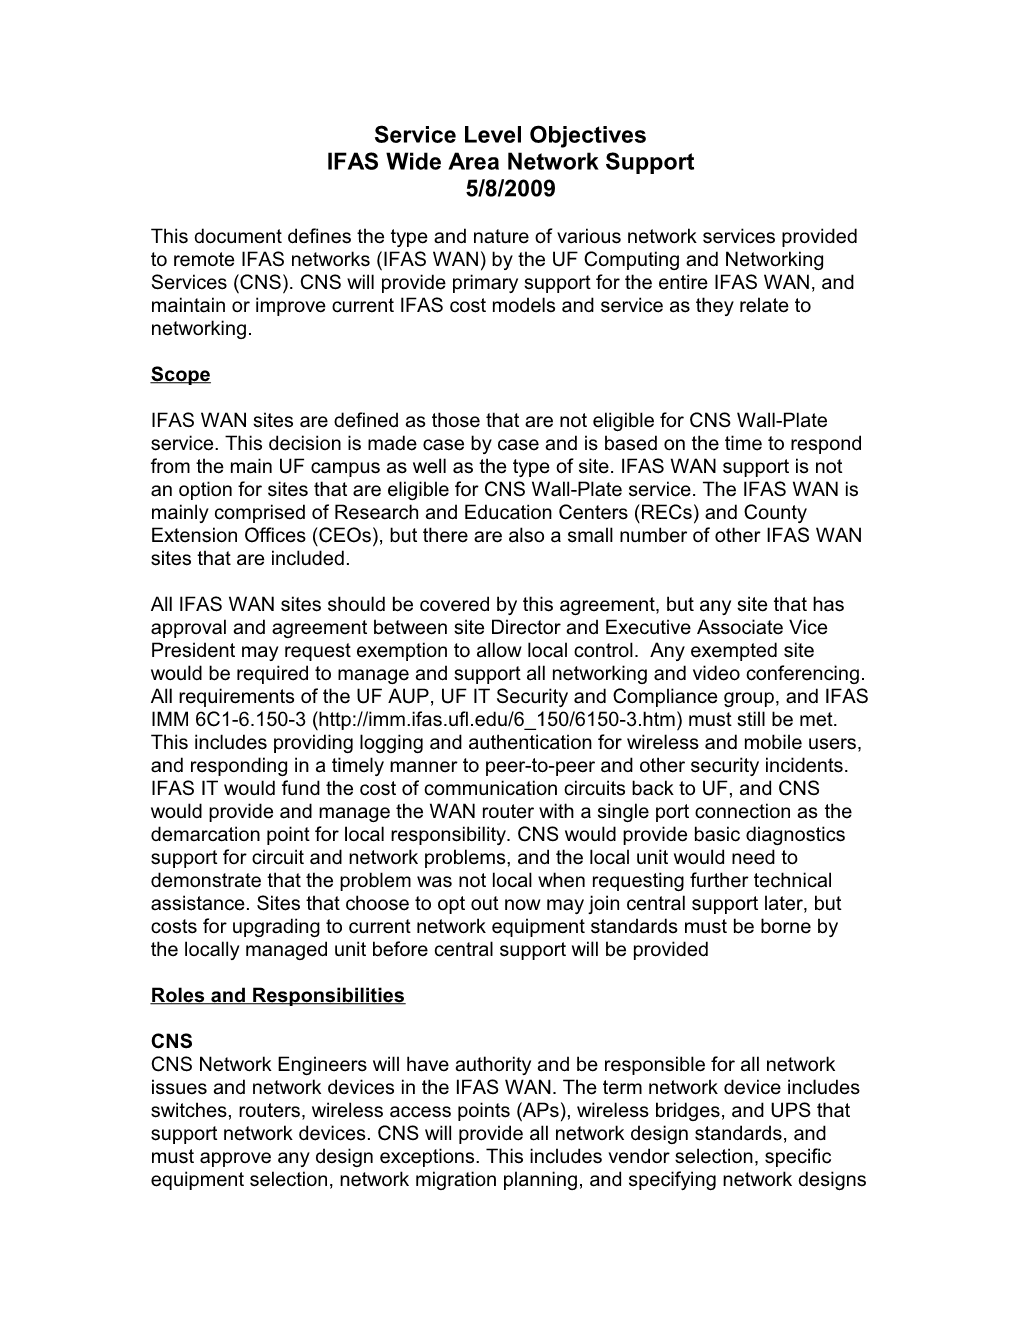 Issues for IFAS WAN Support